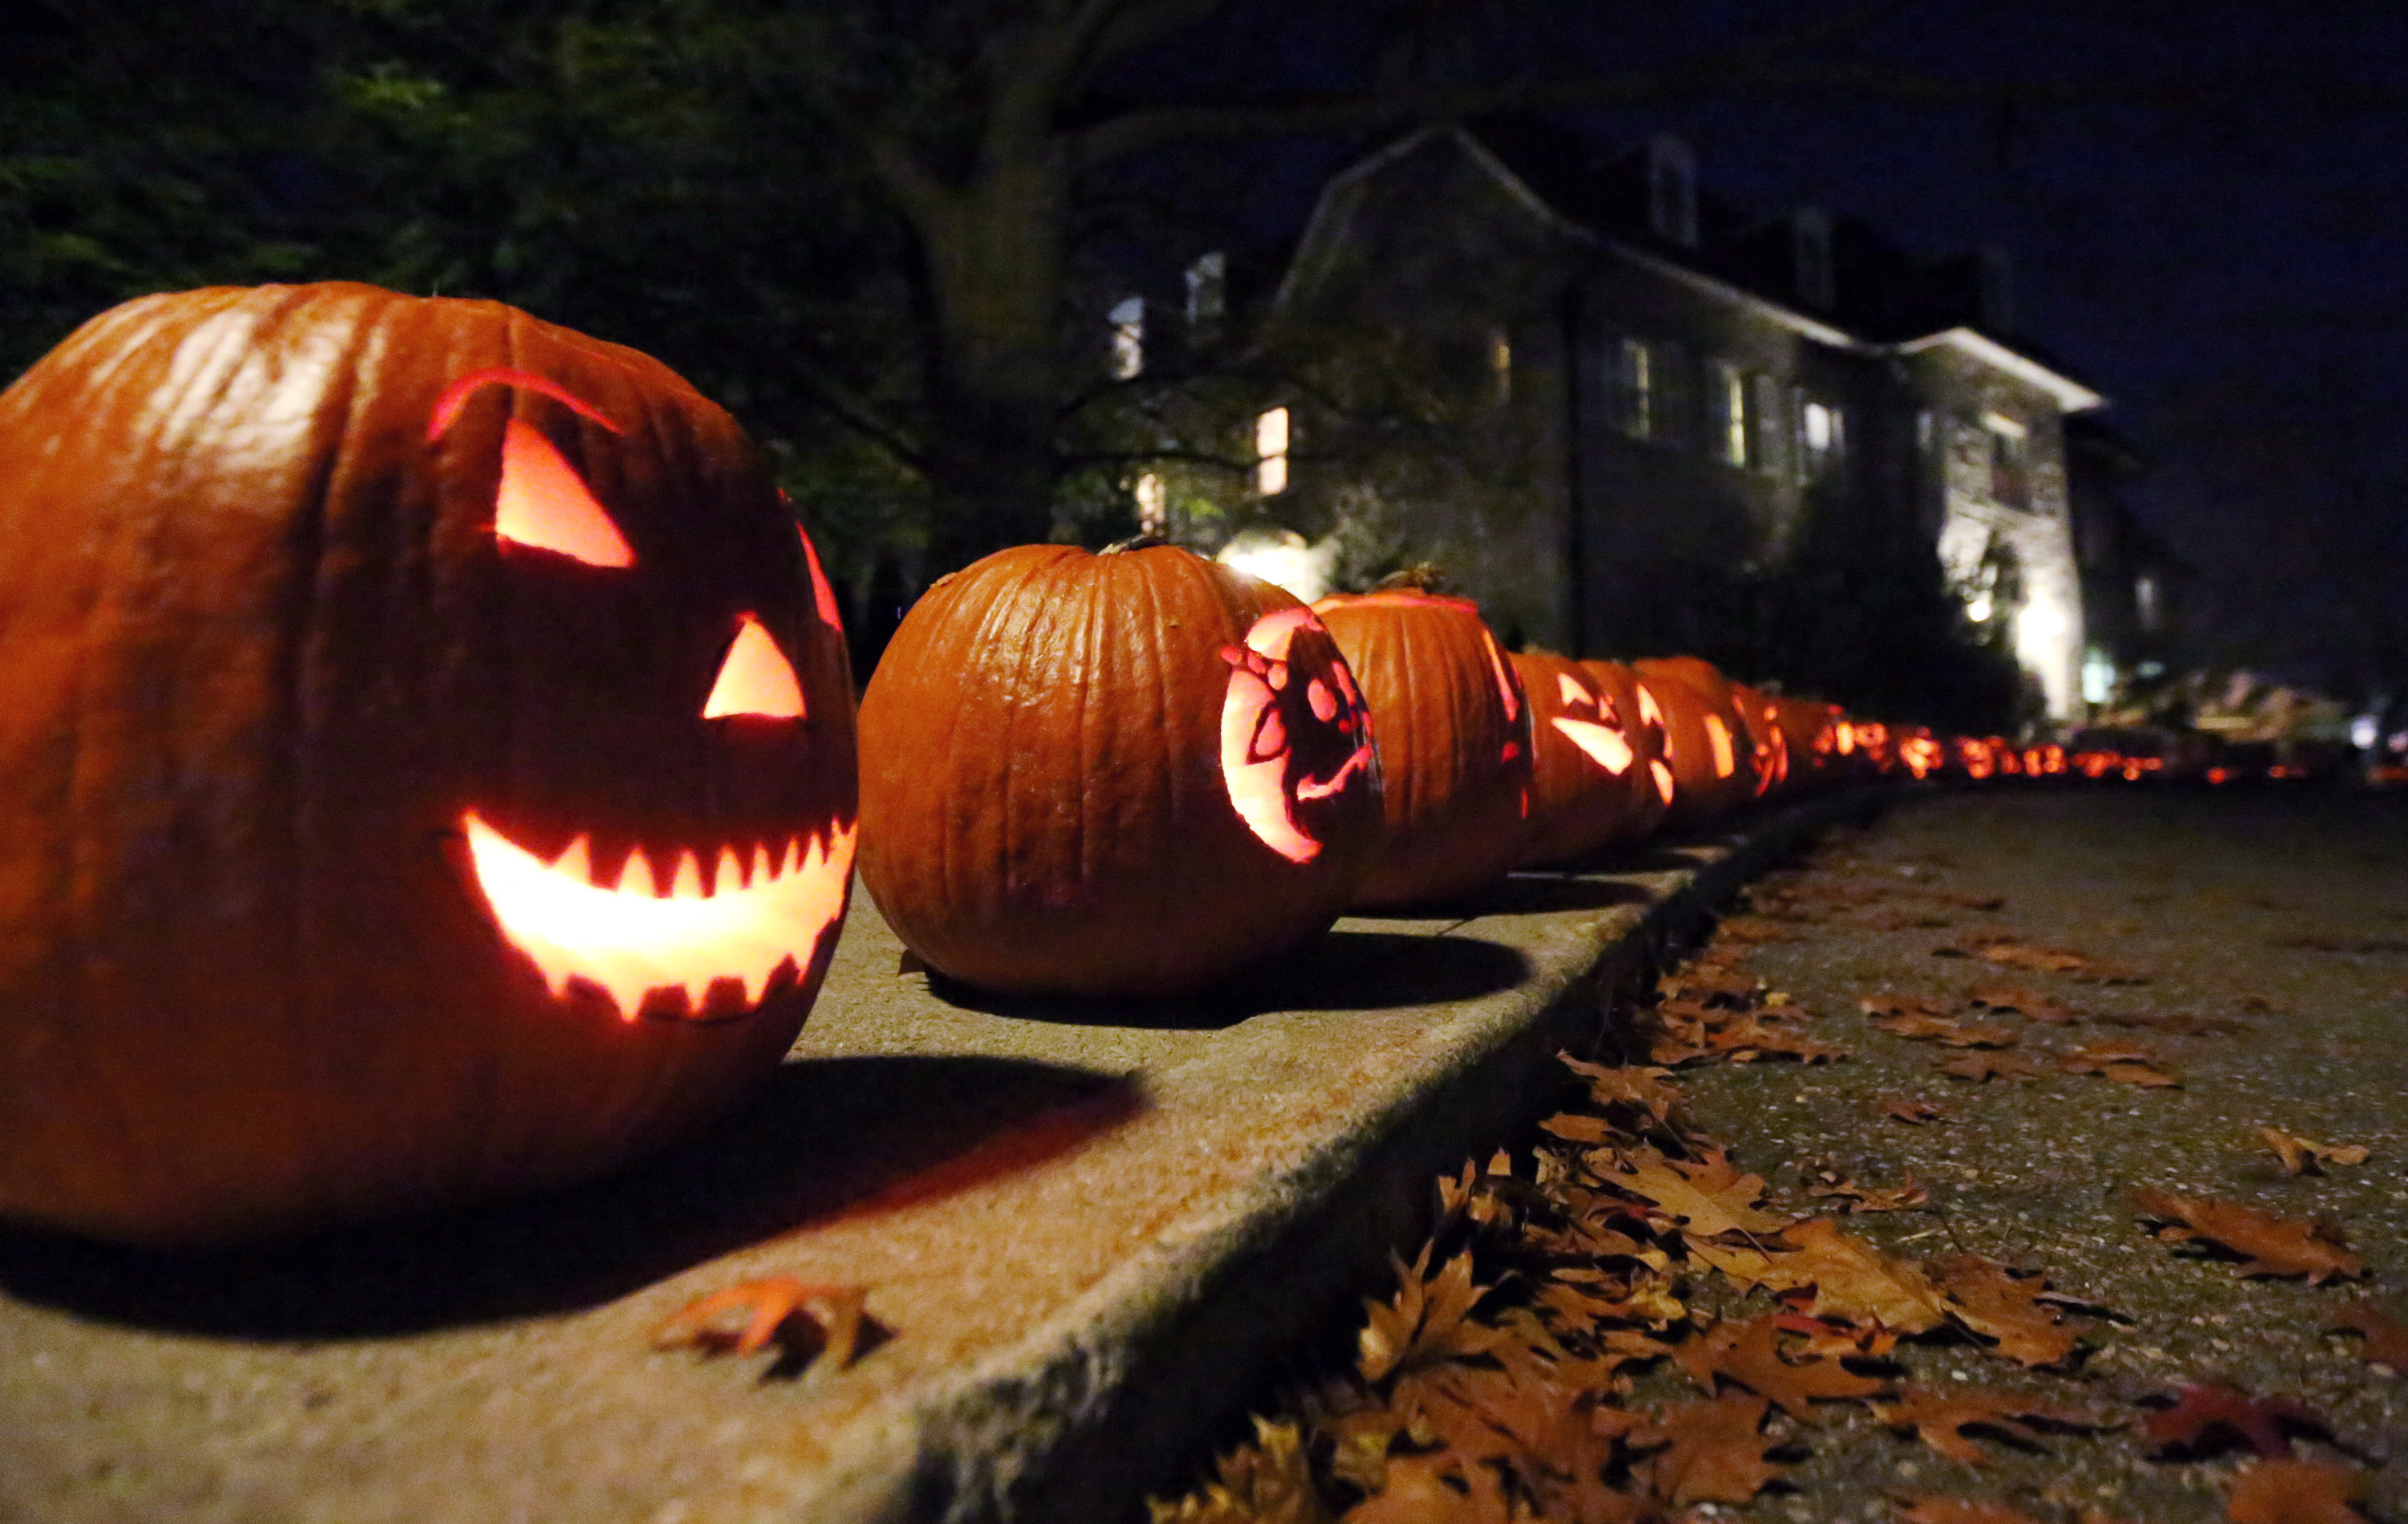 Scary Halloween prices aren’t stopping people from enjoying the holiday in Regina